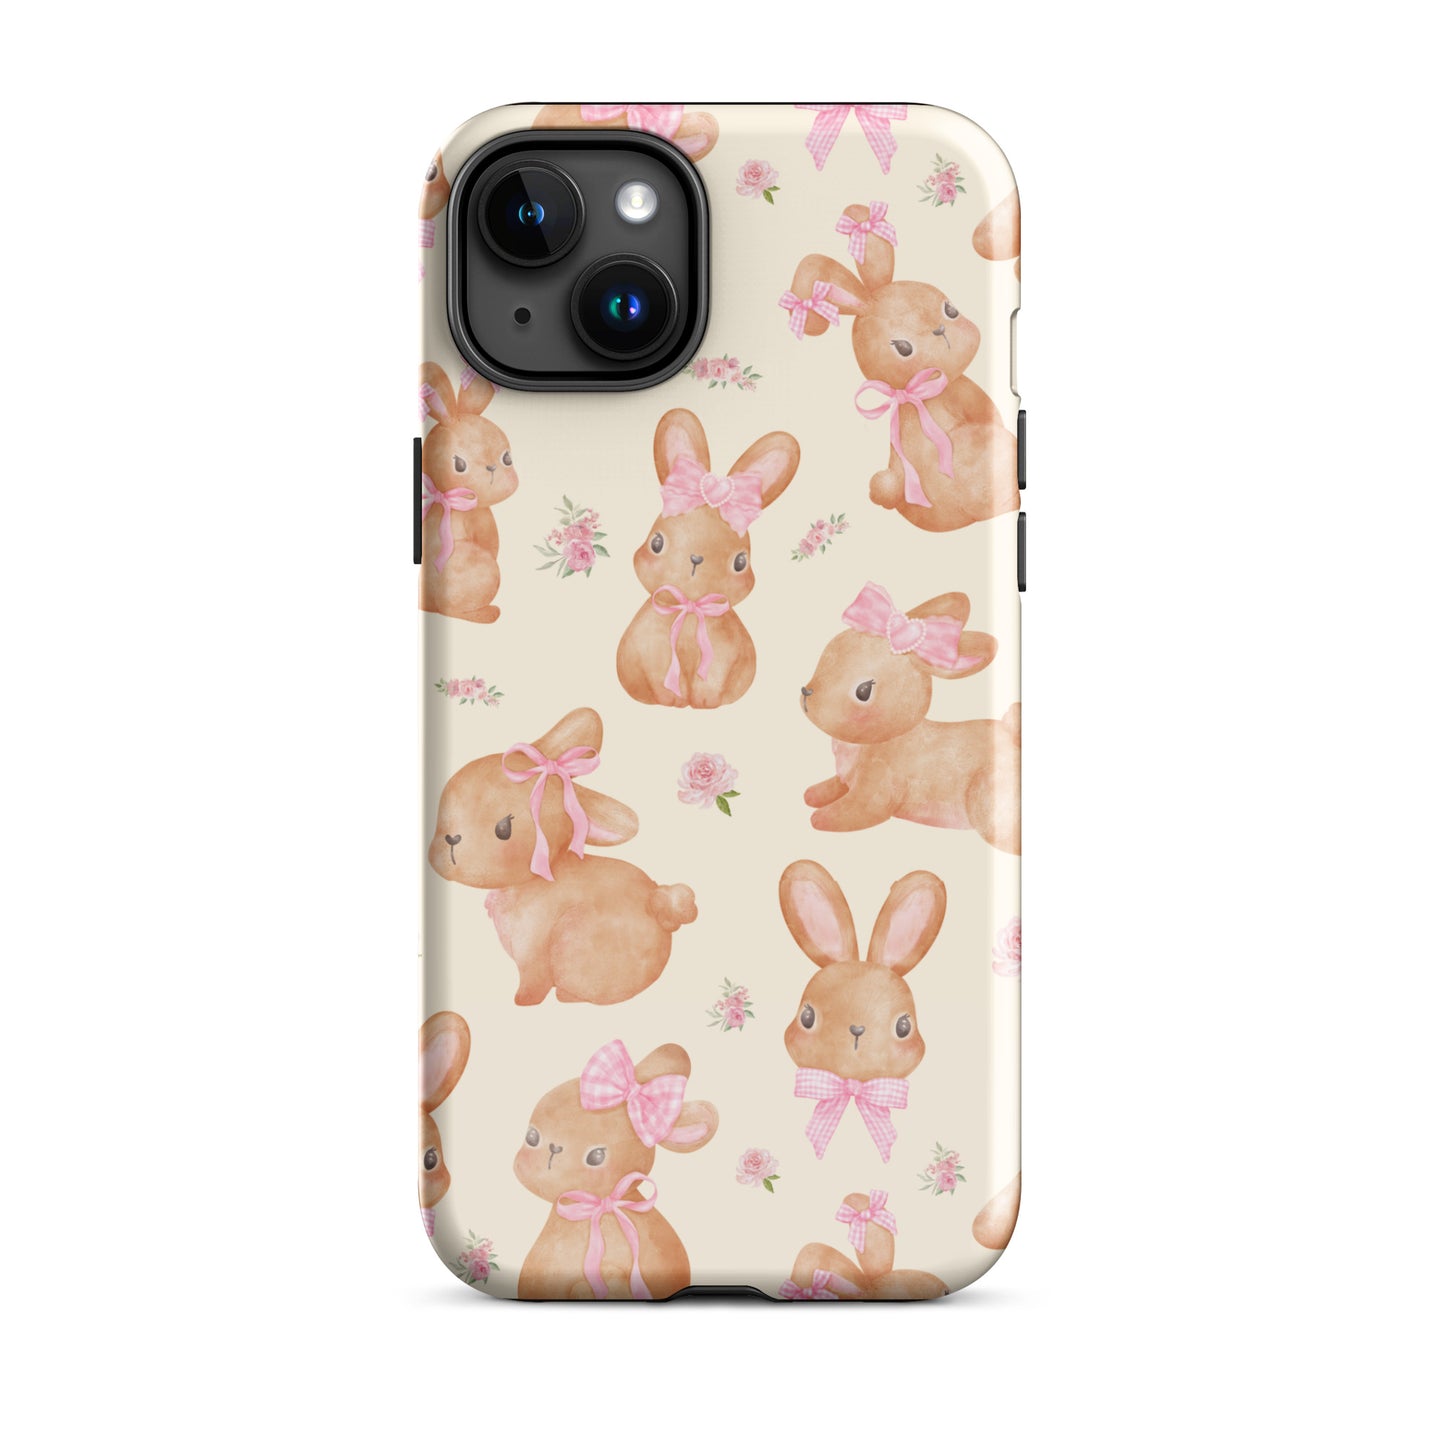 Bow Bunny iPhone Case